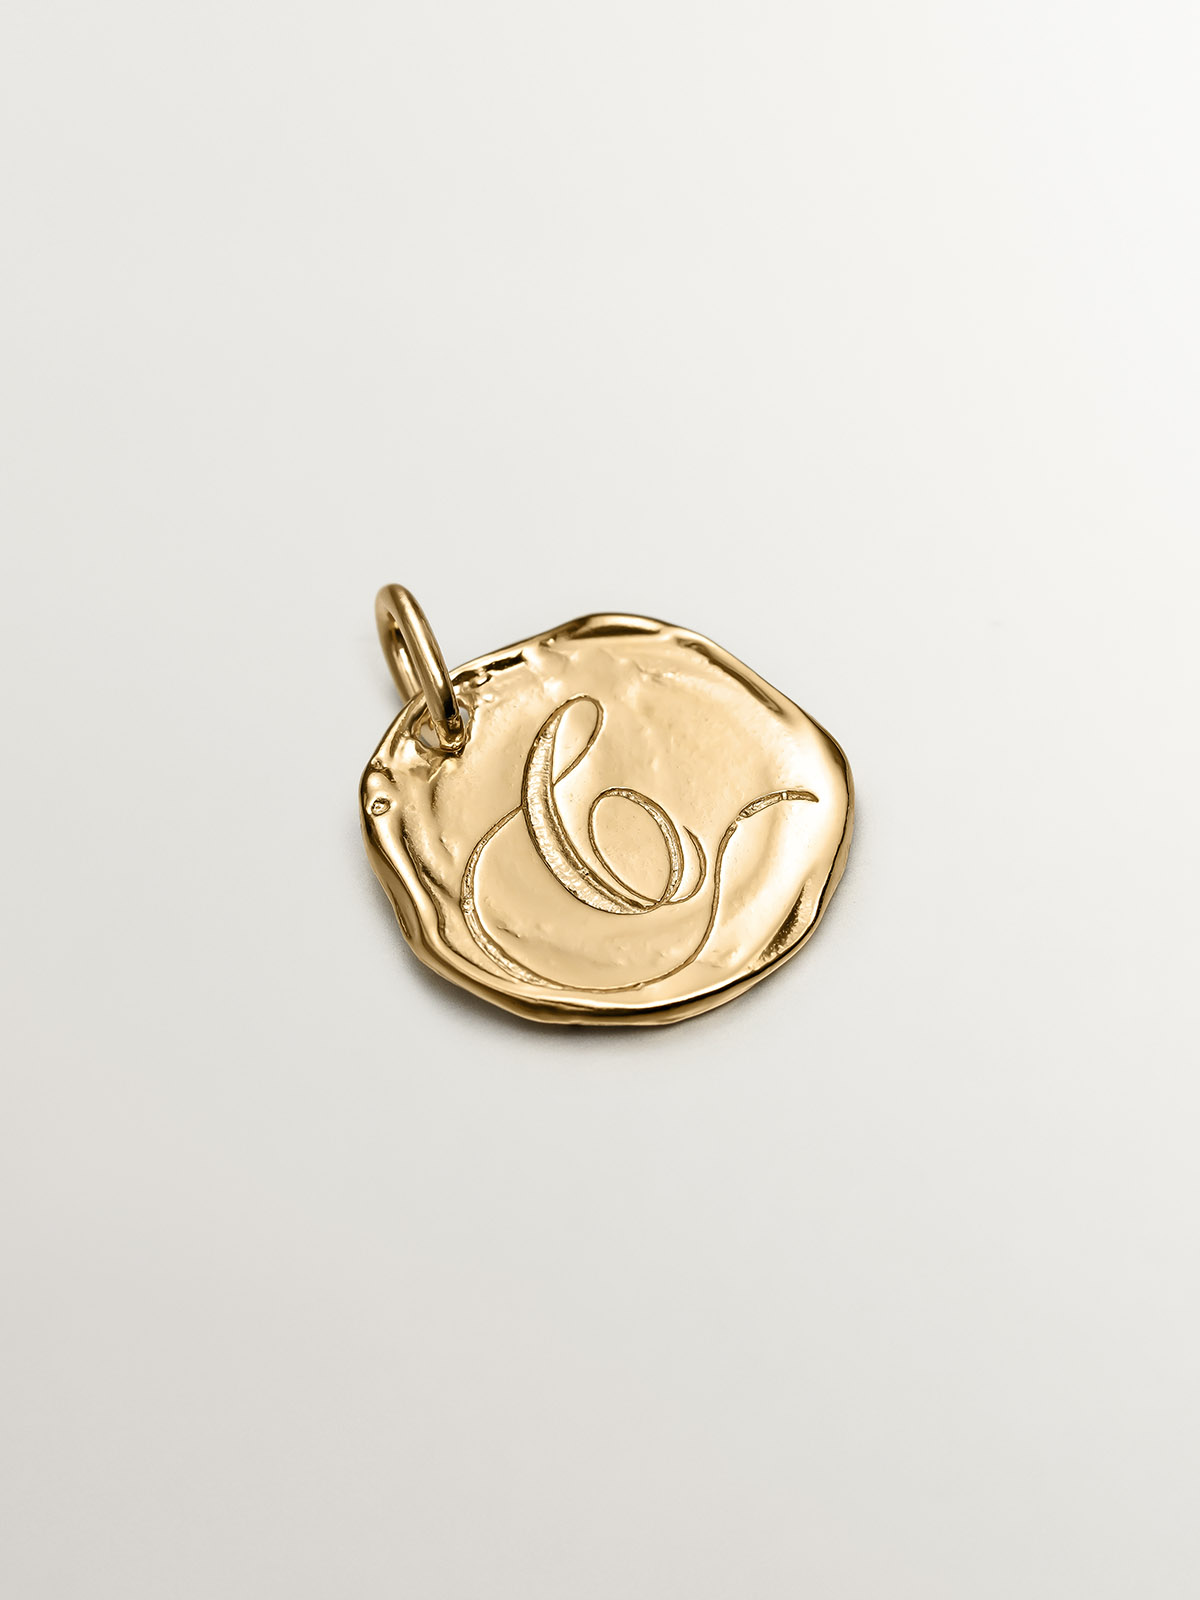 Handcrafted charm made of 925 silver, plated in 18K yellow gold with the initial C.